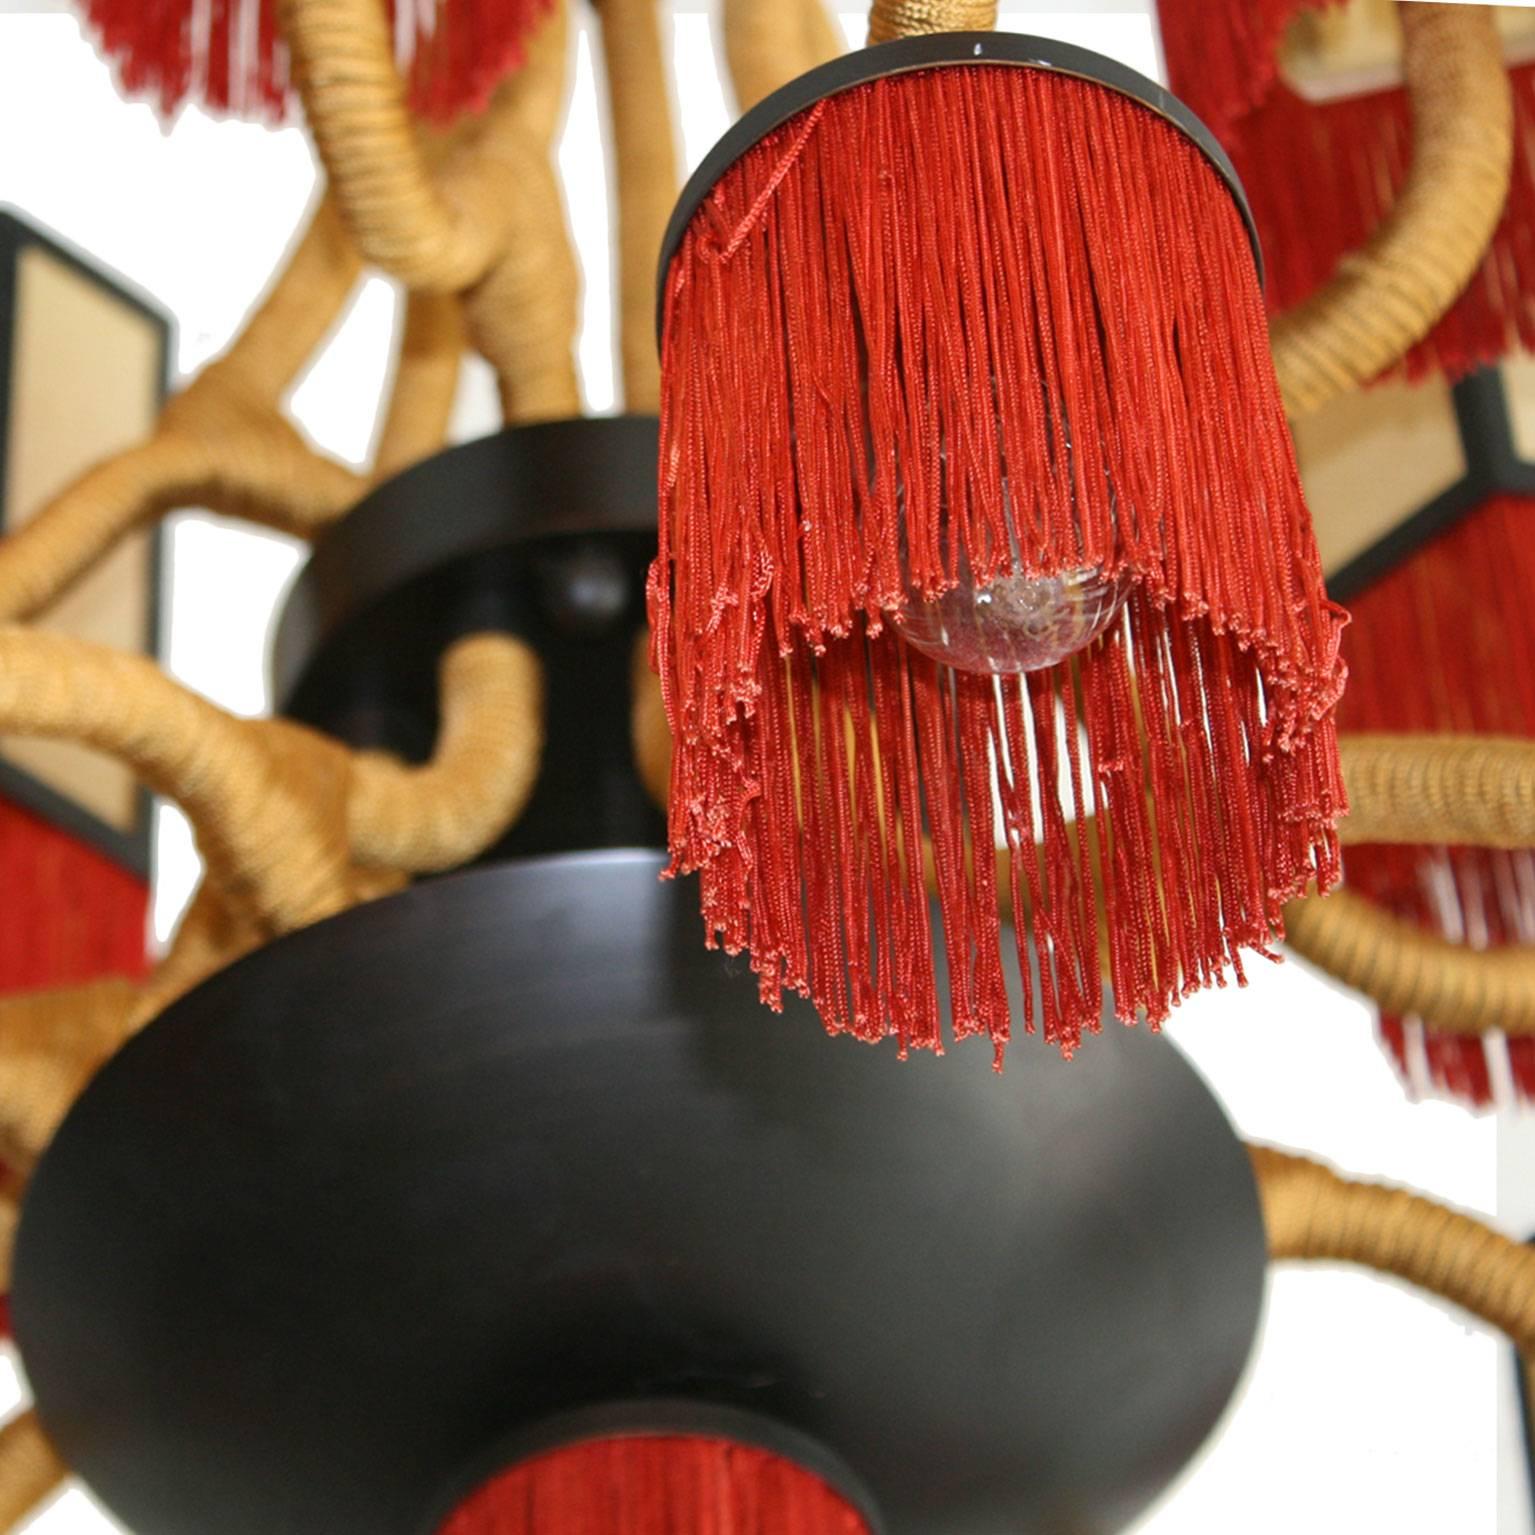 Metal Orientalist Style with Cotton Fringes French Suspension Lamp